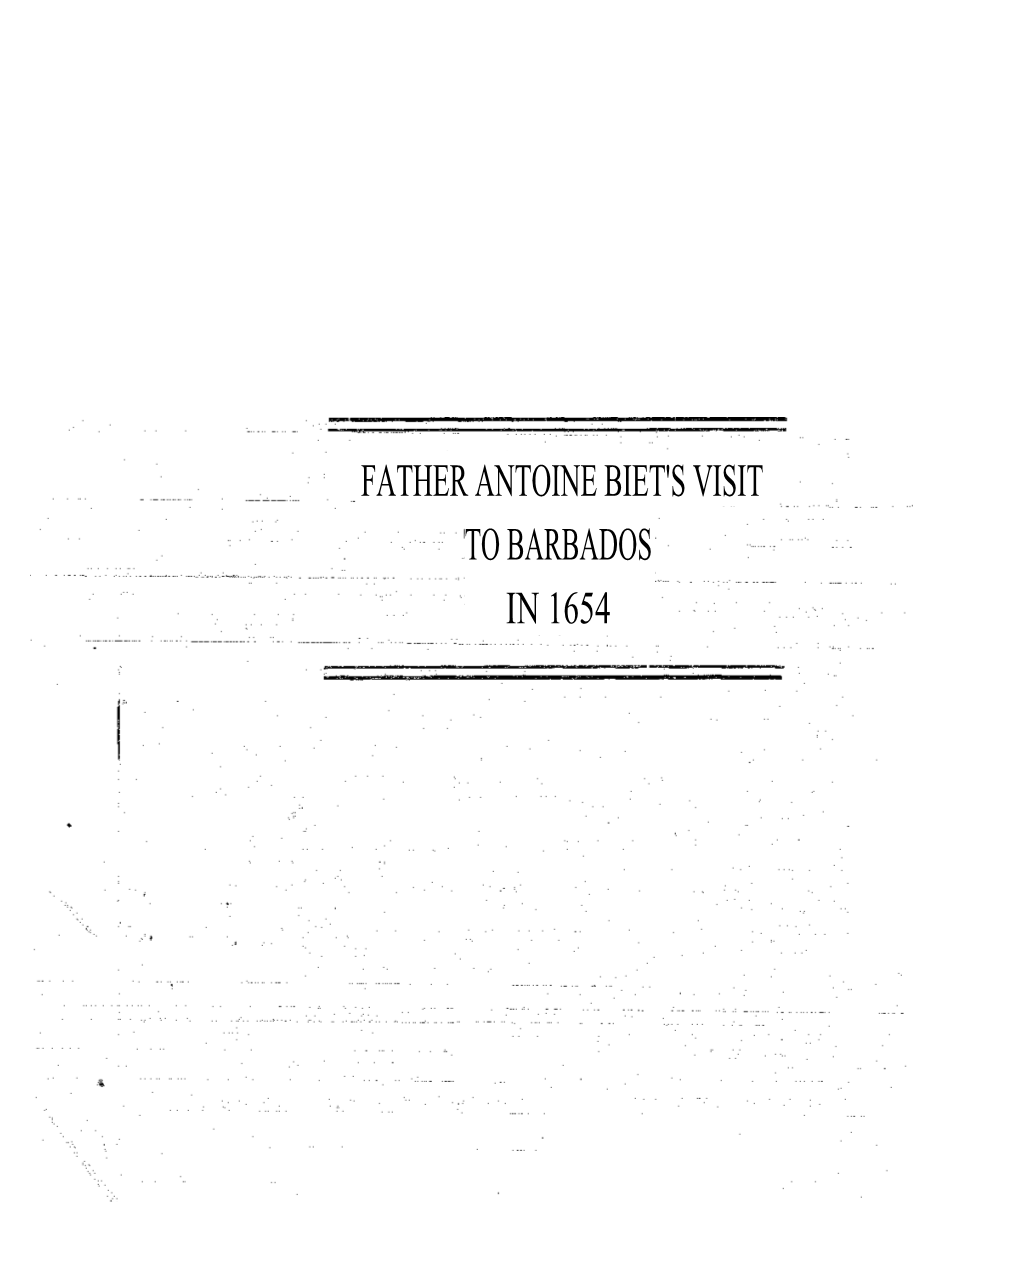 FATHER ANTOINE BIET's VISIT to BARBADOS in 1654 Lha • I I,1 14441 Ict41 Litti°437 the JOURNAL of the B.M.H.S